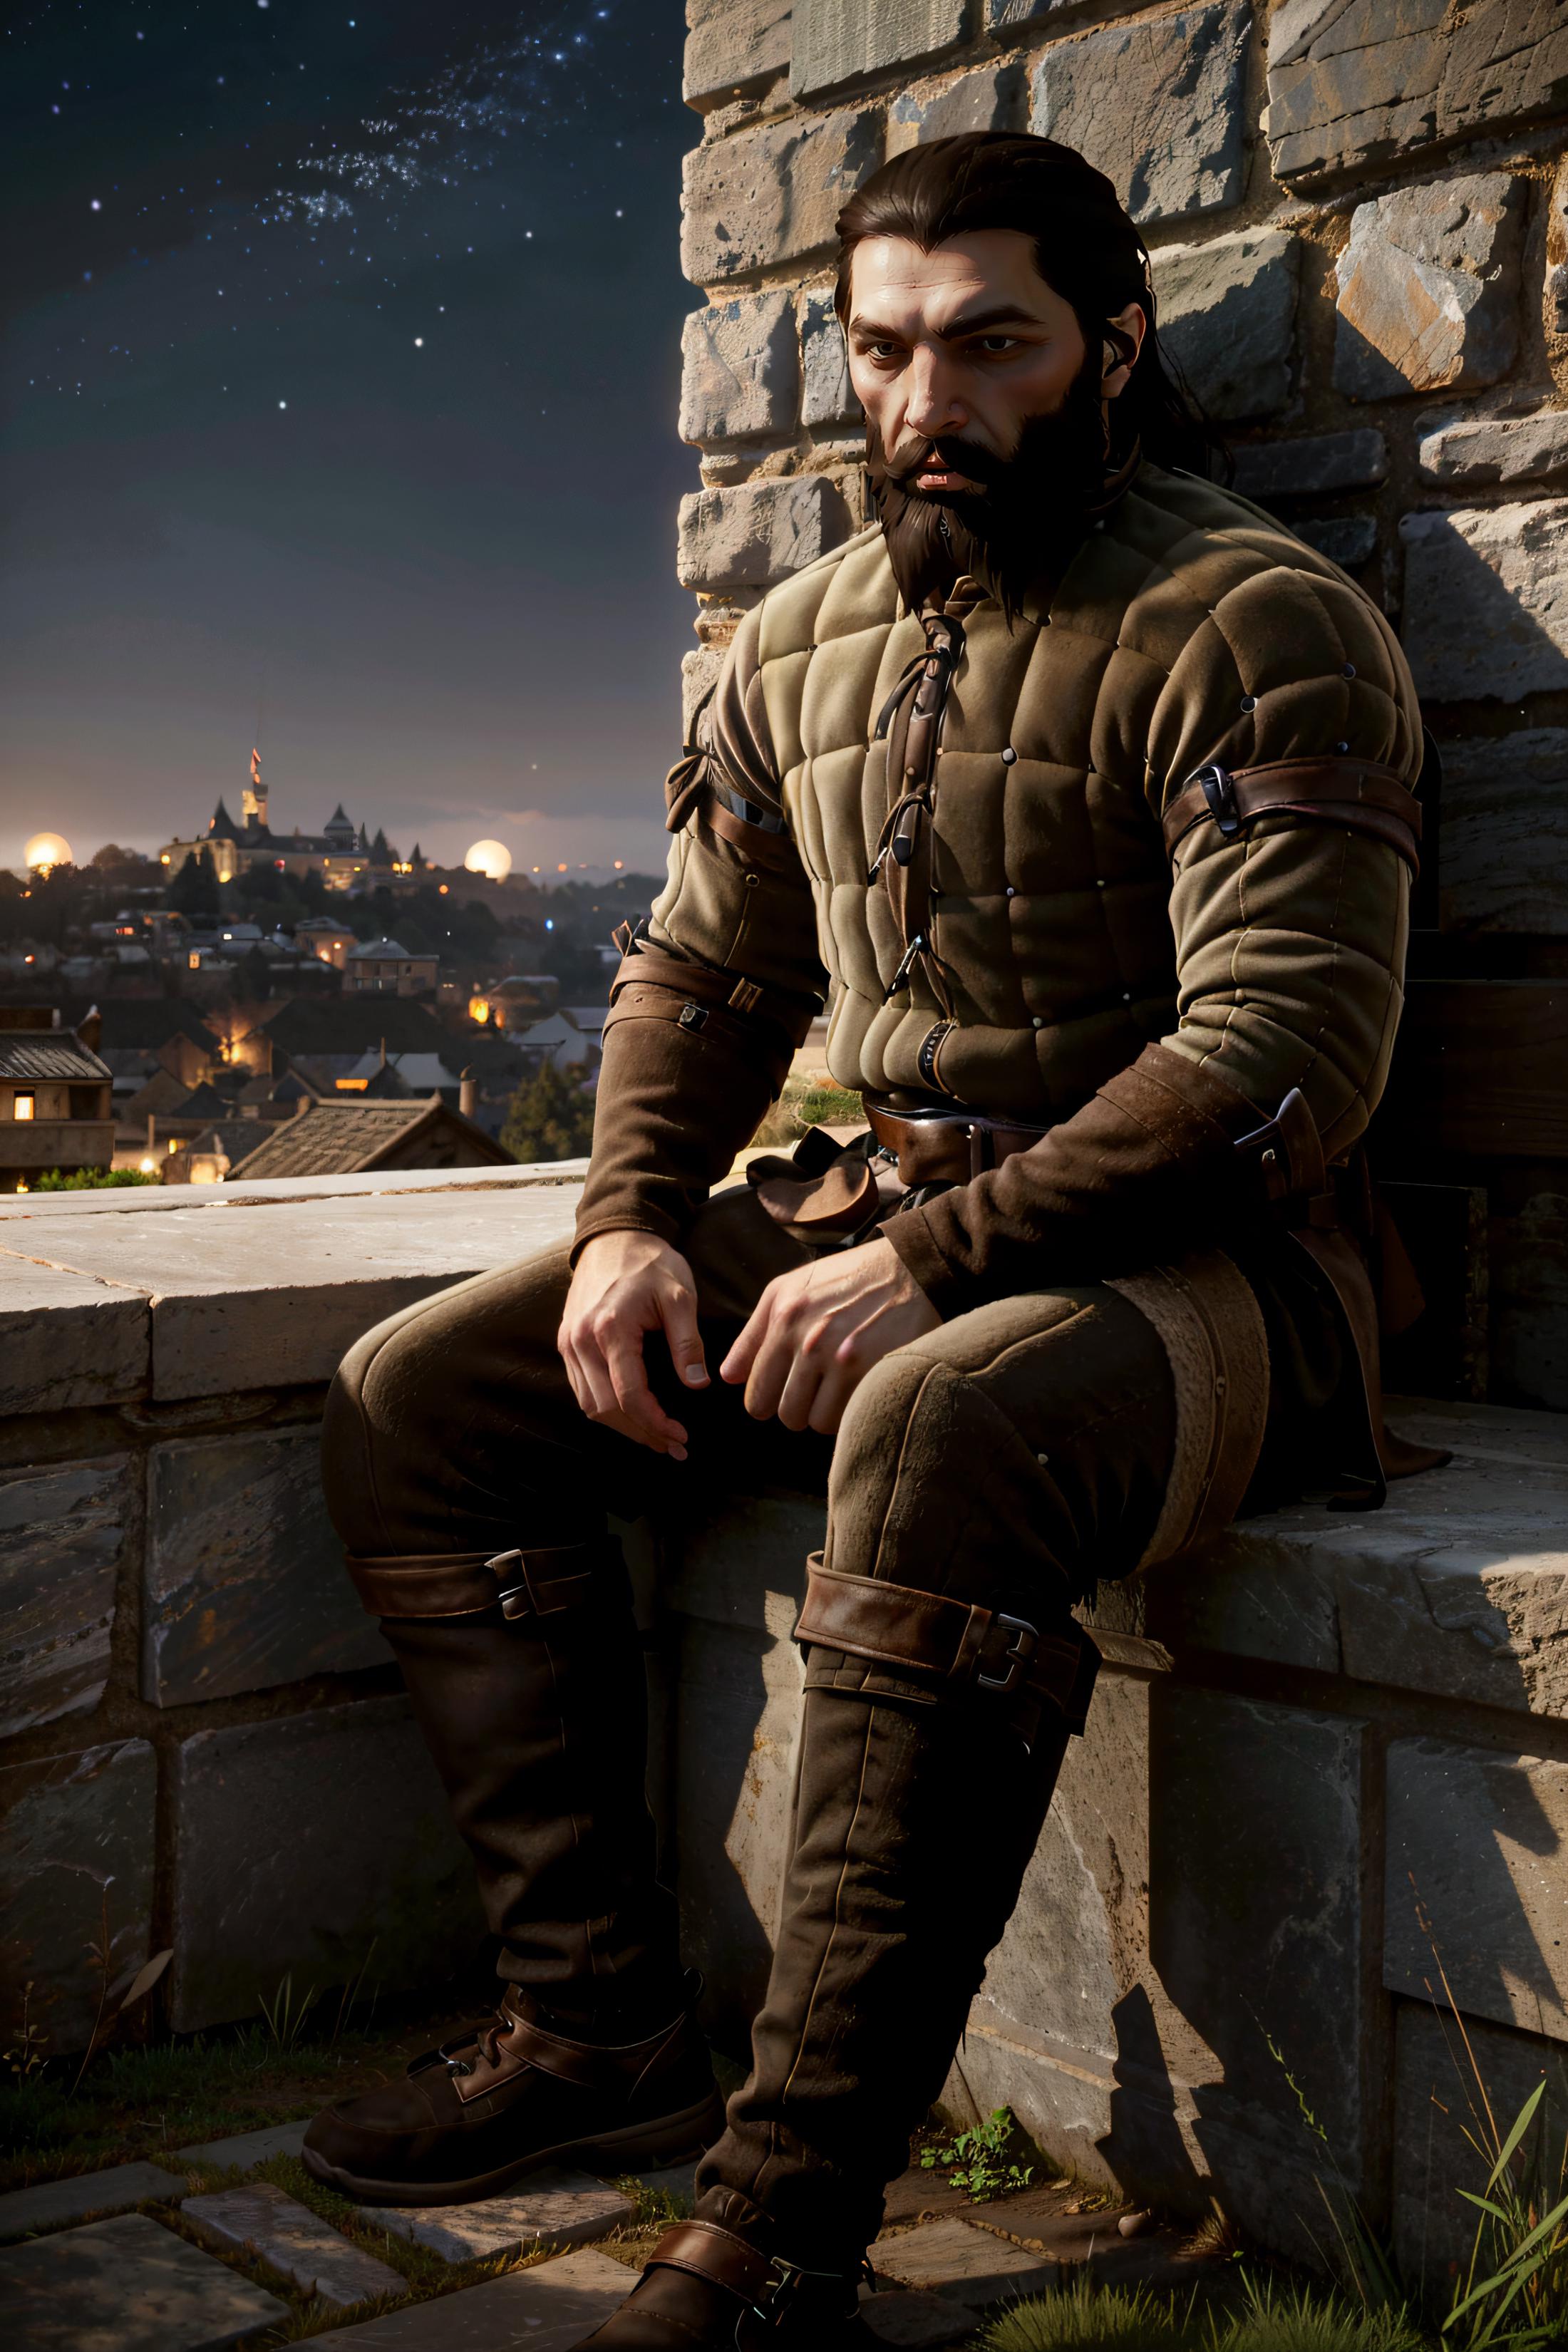 Blackwall from Dragon Age: Inquisition image by BloodRedKittie